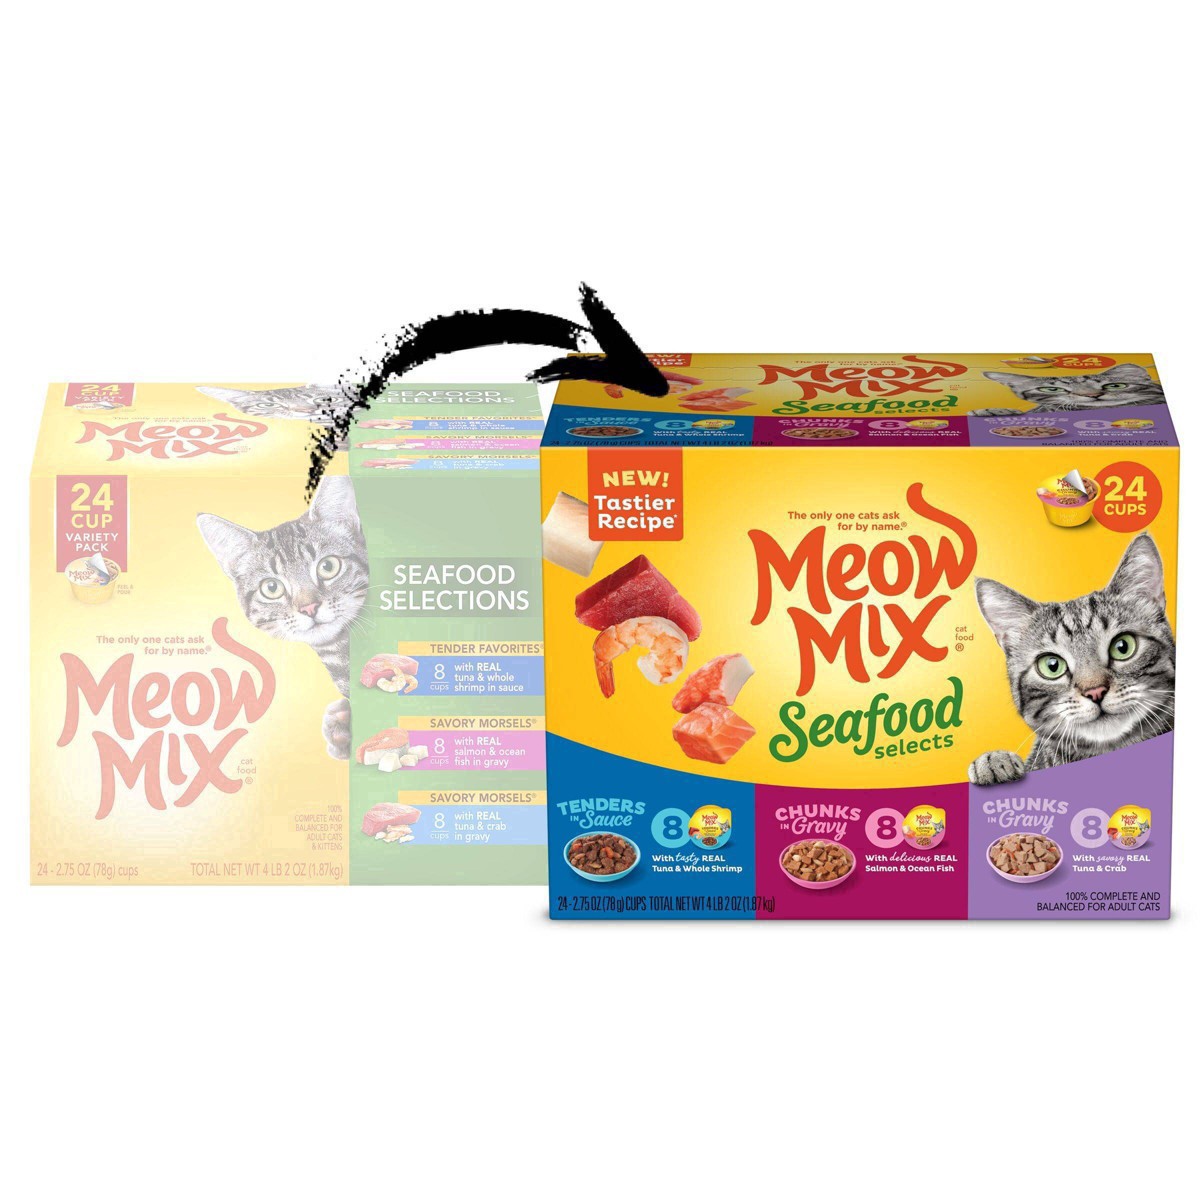 slide 18 of 27, Meow Mix Seafood Selects Wet Cat Food Variety Pack, 24 Cups, 2.75 Oz. Each (Packaging And Formulation Updates Underway), 24 ct